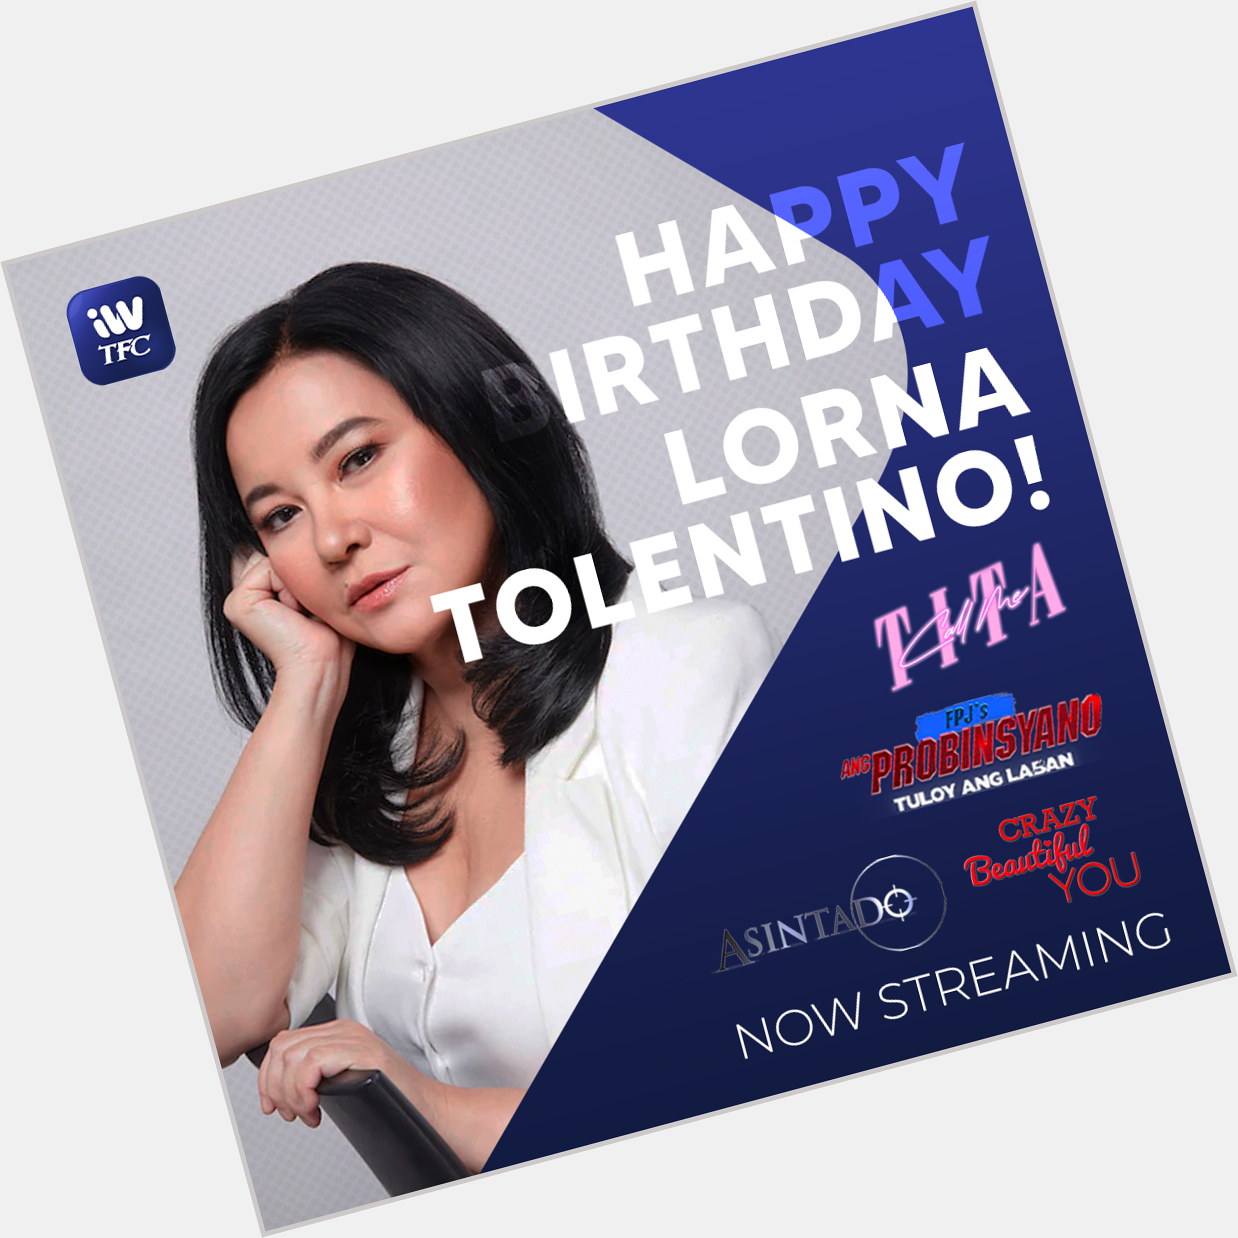 Happy Birthday, Ms. Lorna Tolentino!   Celebrate this special day by watching her shows and movies on iWantTFC! 